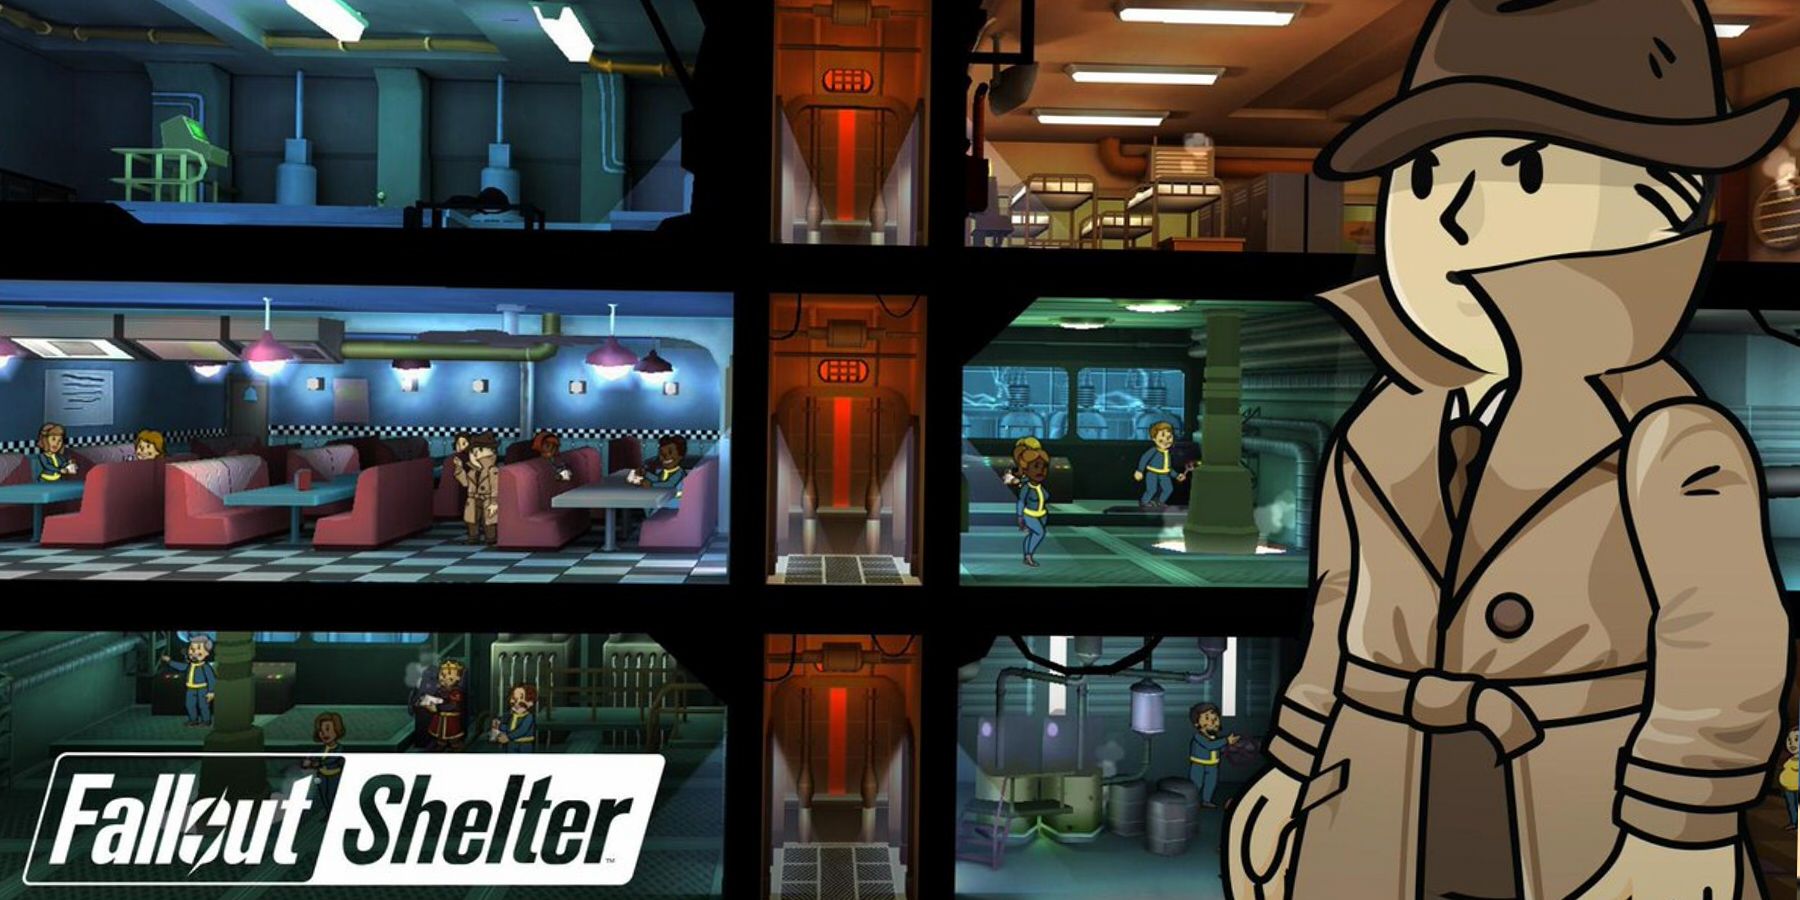 mysterious stranger in fallout shelter